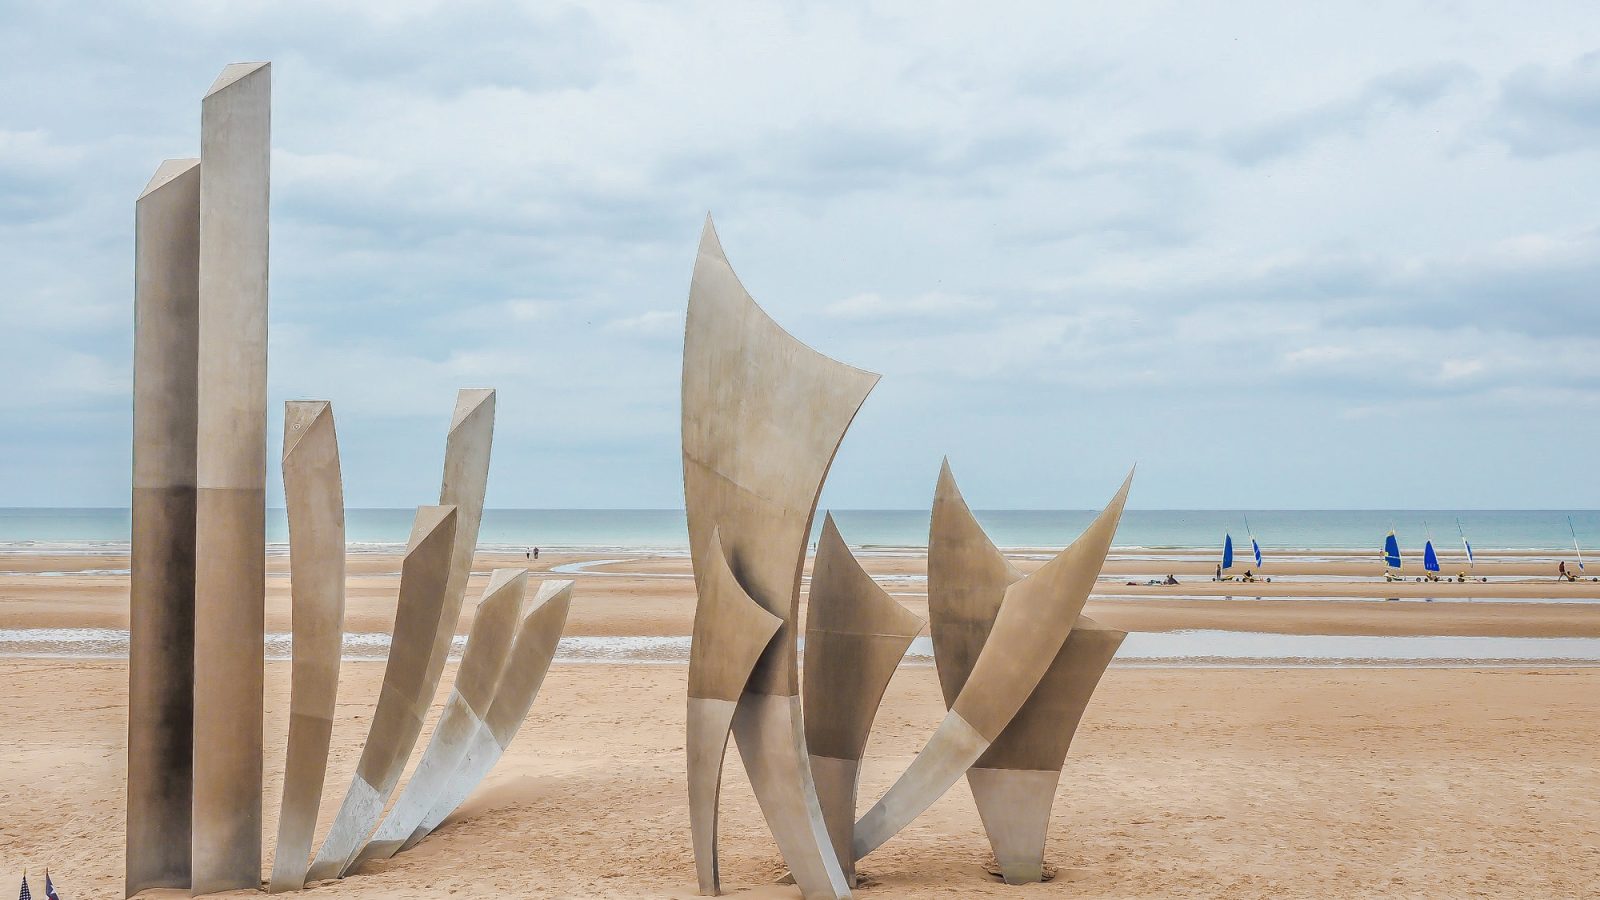 Best D-Day Sites in Normandy, France | WWII | WW2 | Caen Memorial Museum | Arromanches | Omaha Beach | Pointe du Hoc | Normandy American Cemetery | La Cambe German Cemetery | World War 2